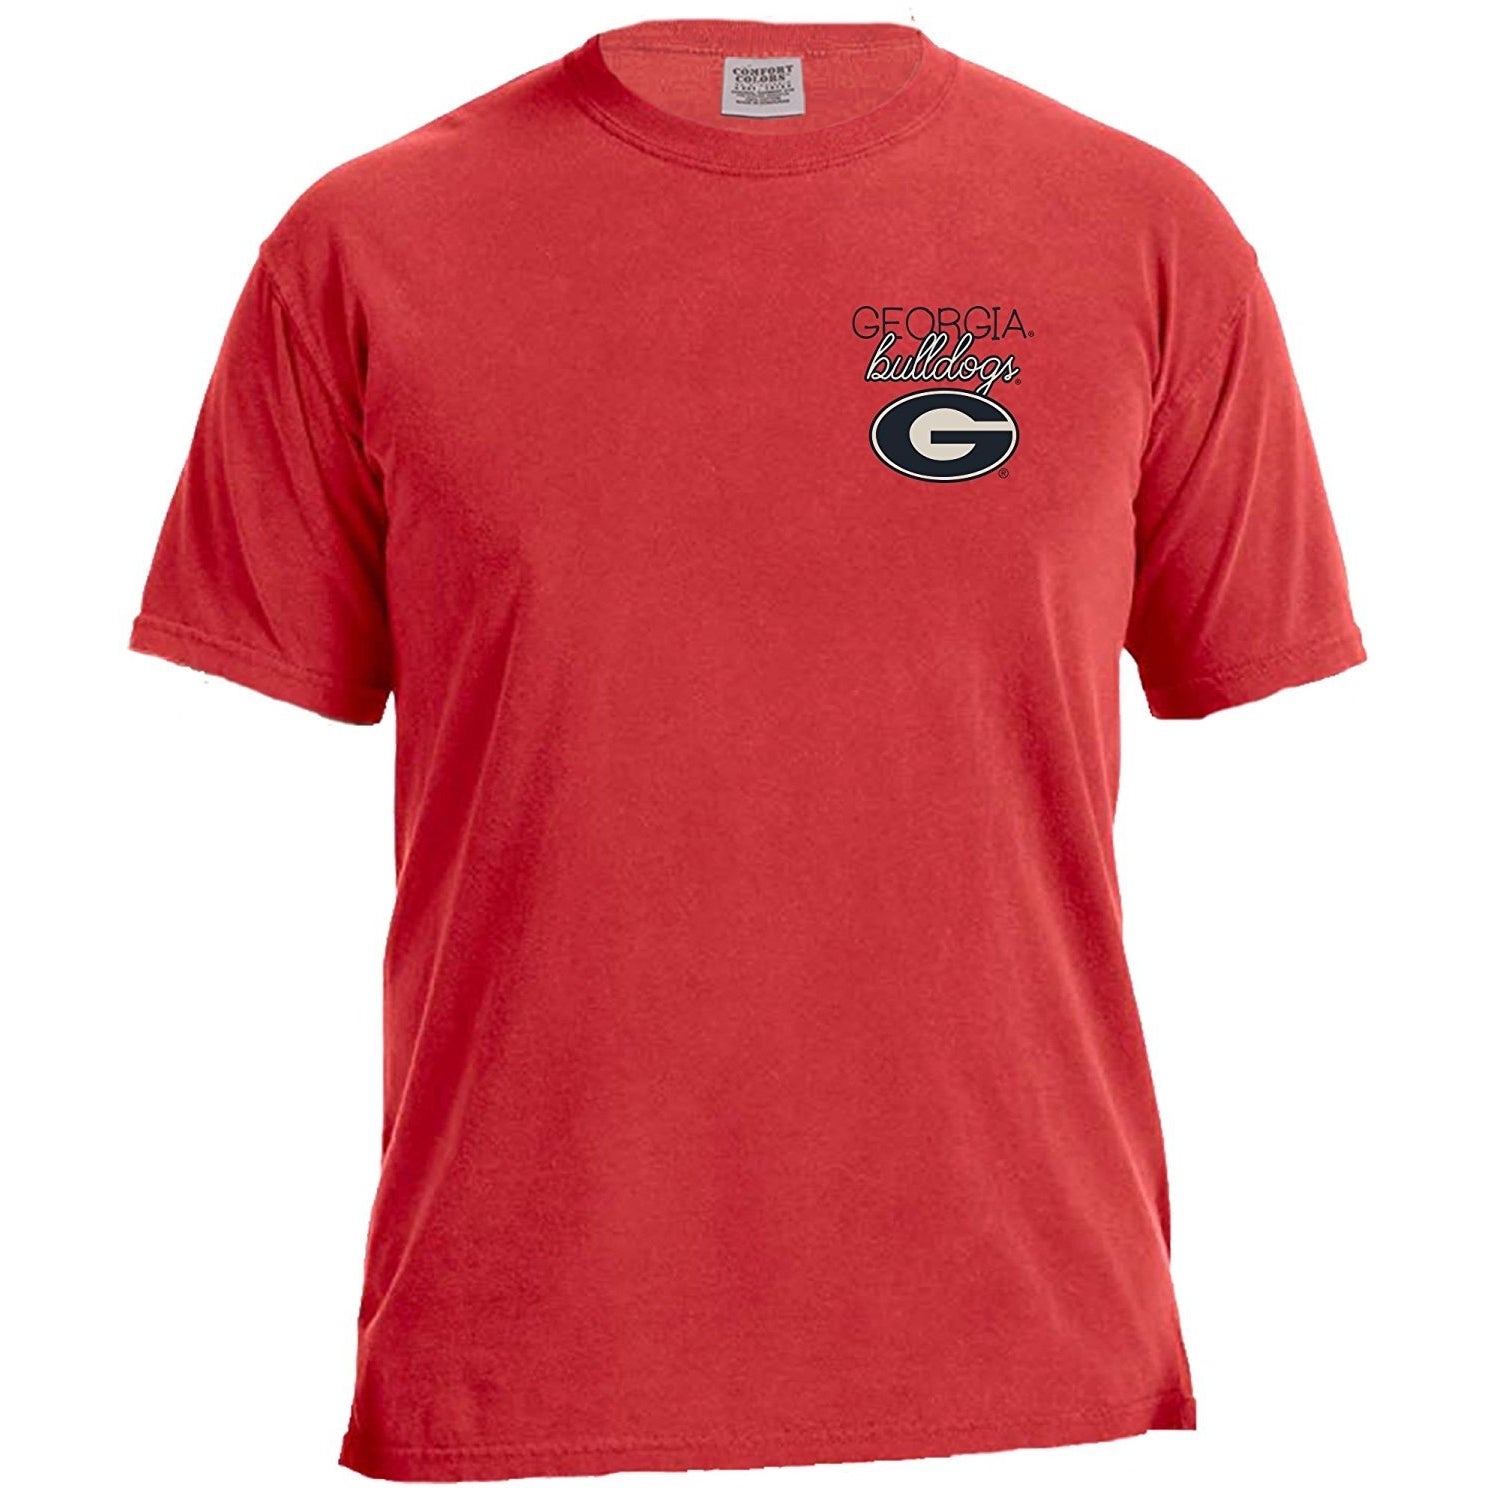 Laces and Bows Collegiate T-Shirt - Georgia - Southern Ivy Boutique